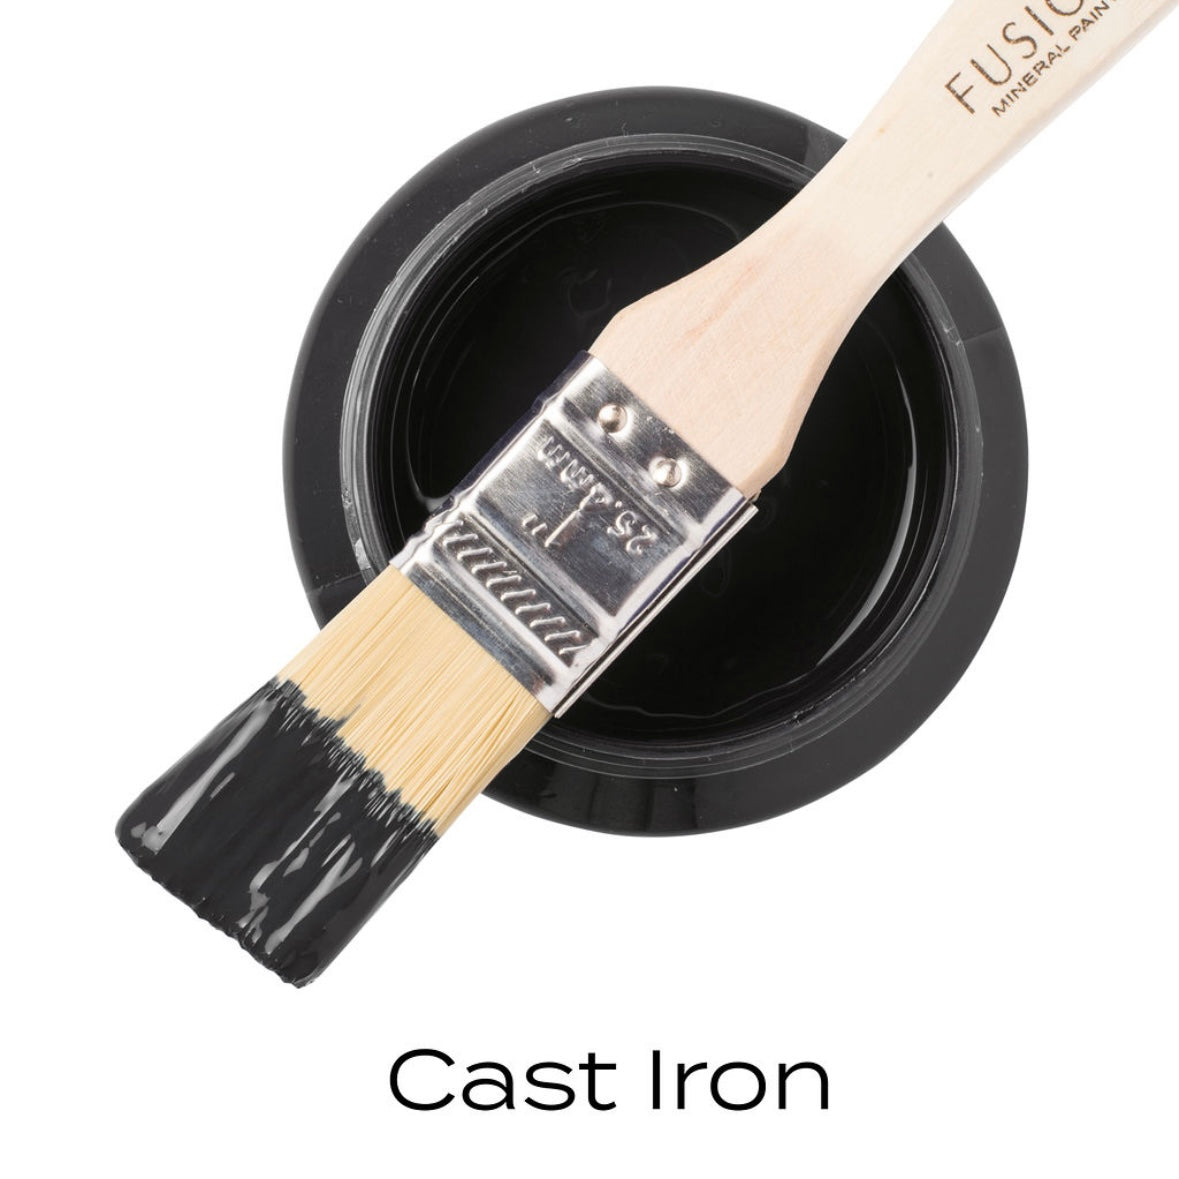 Cast Iron by Fusion